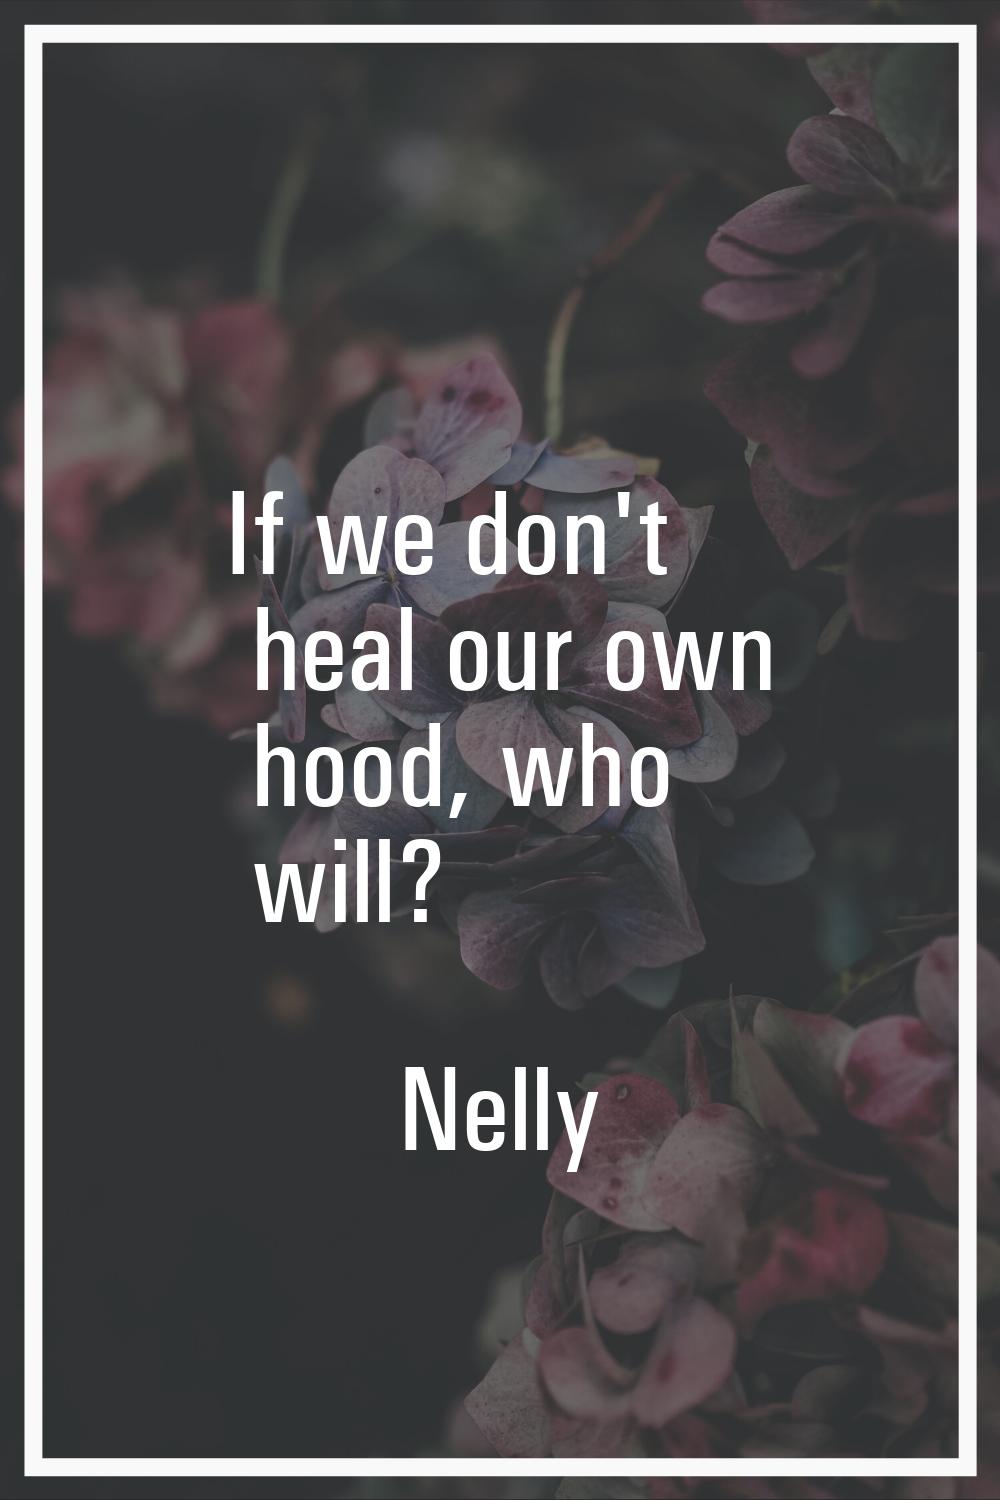 If we don't heal our own hood, who will?